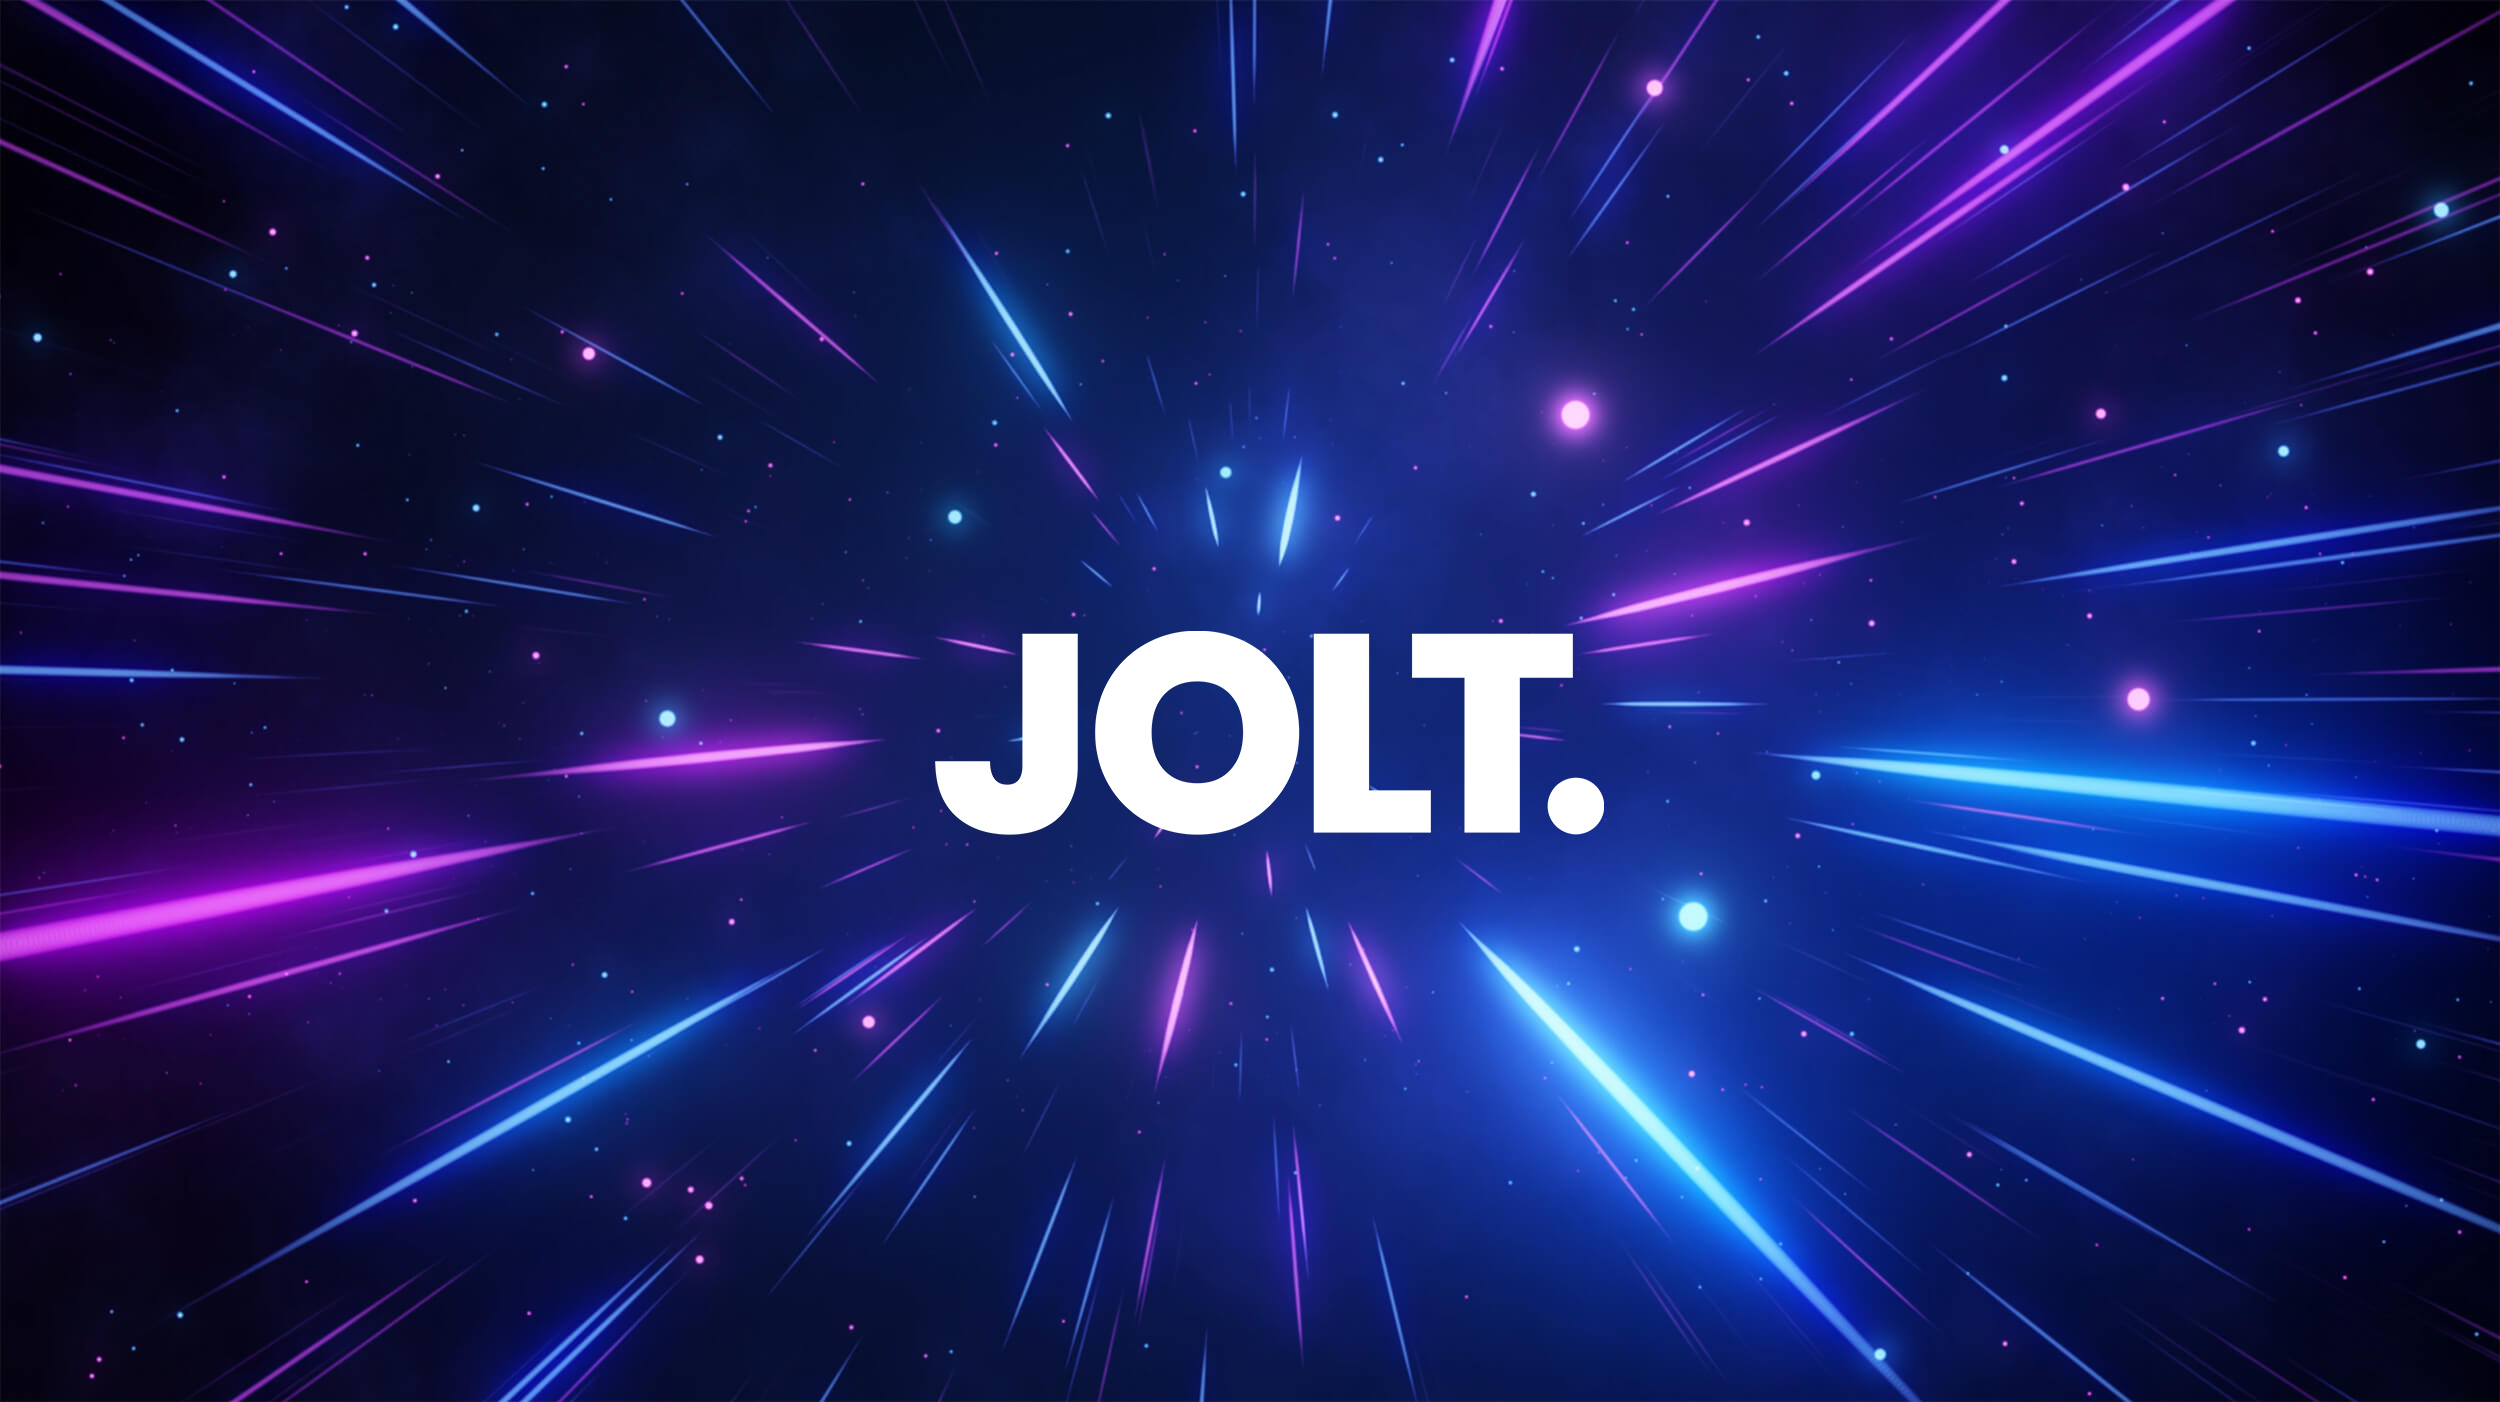 Names with stories: The story behind Jolt Digital - Smart Branding